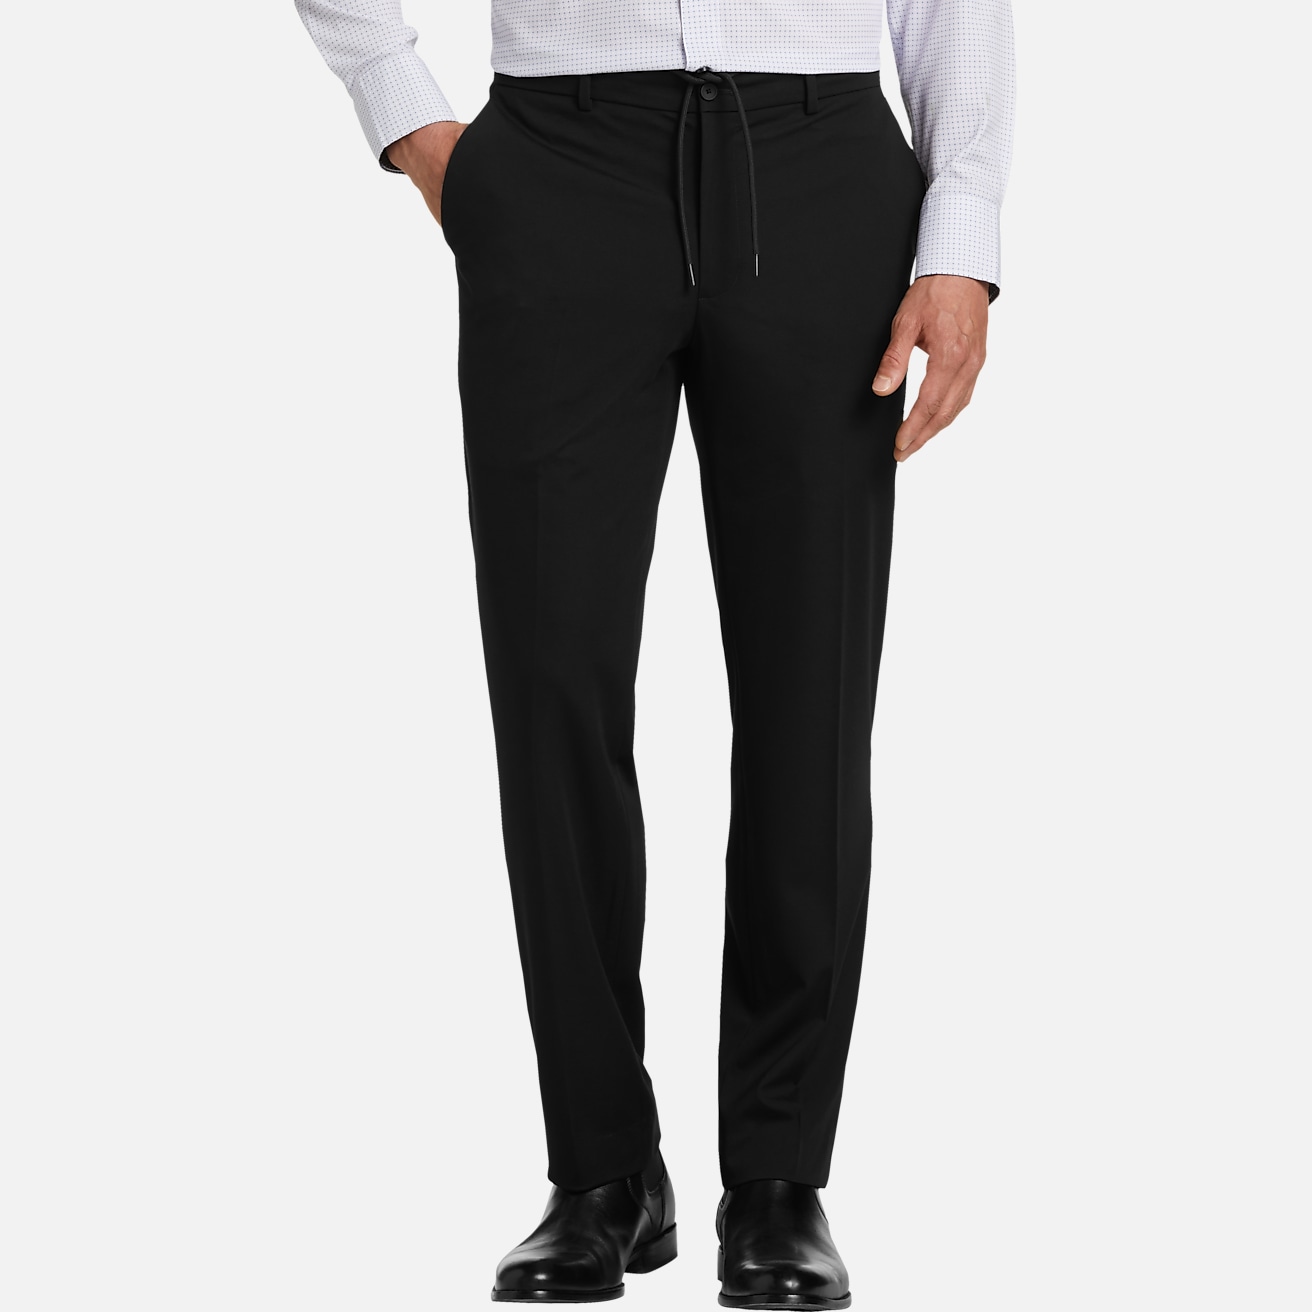 Awearness Kenneth Cole Knit Slim Fit Suit Separates Solid Pants, Pants